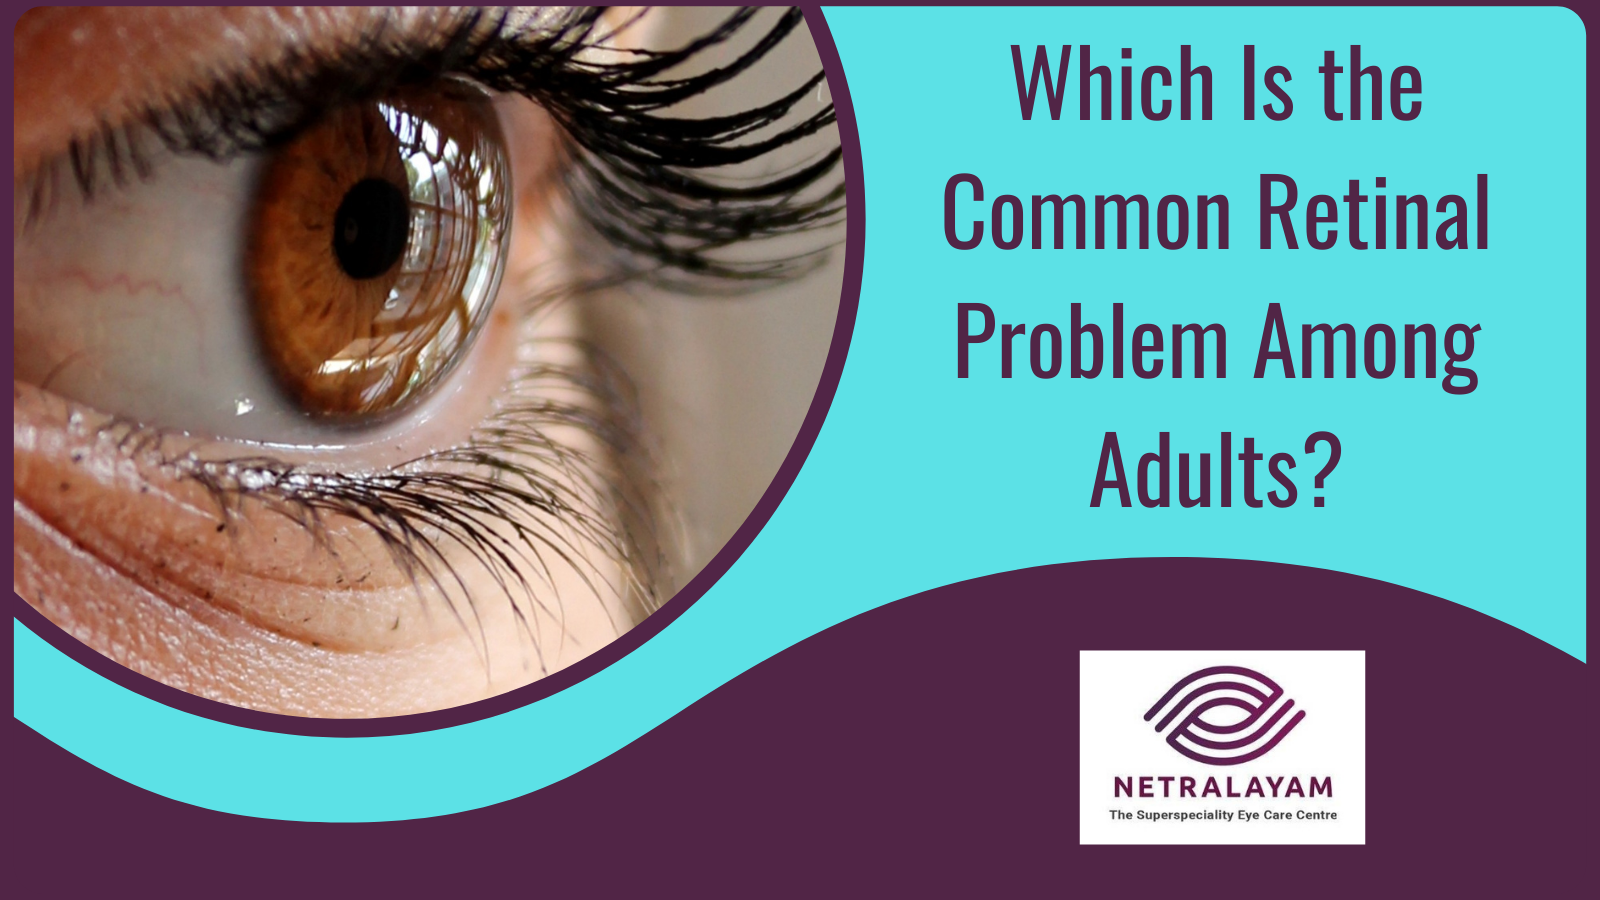 Which Is the Common Retinal Problem Among Adults?